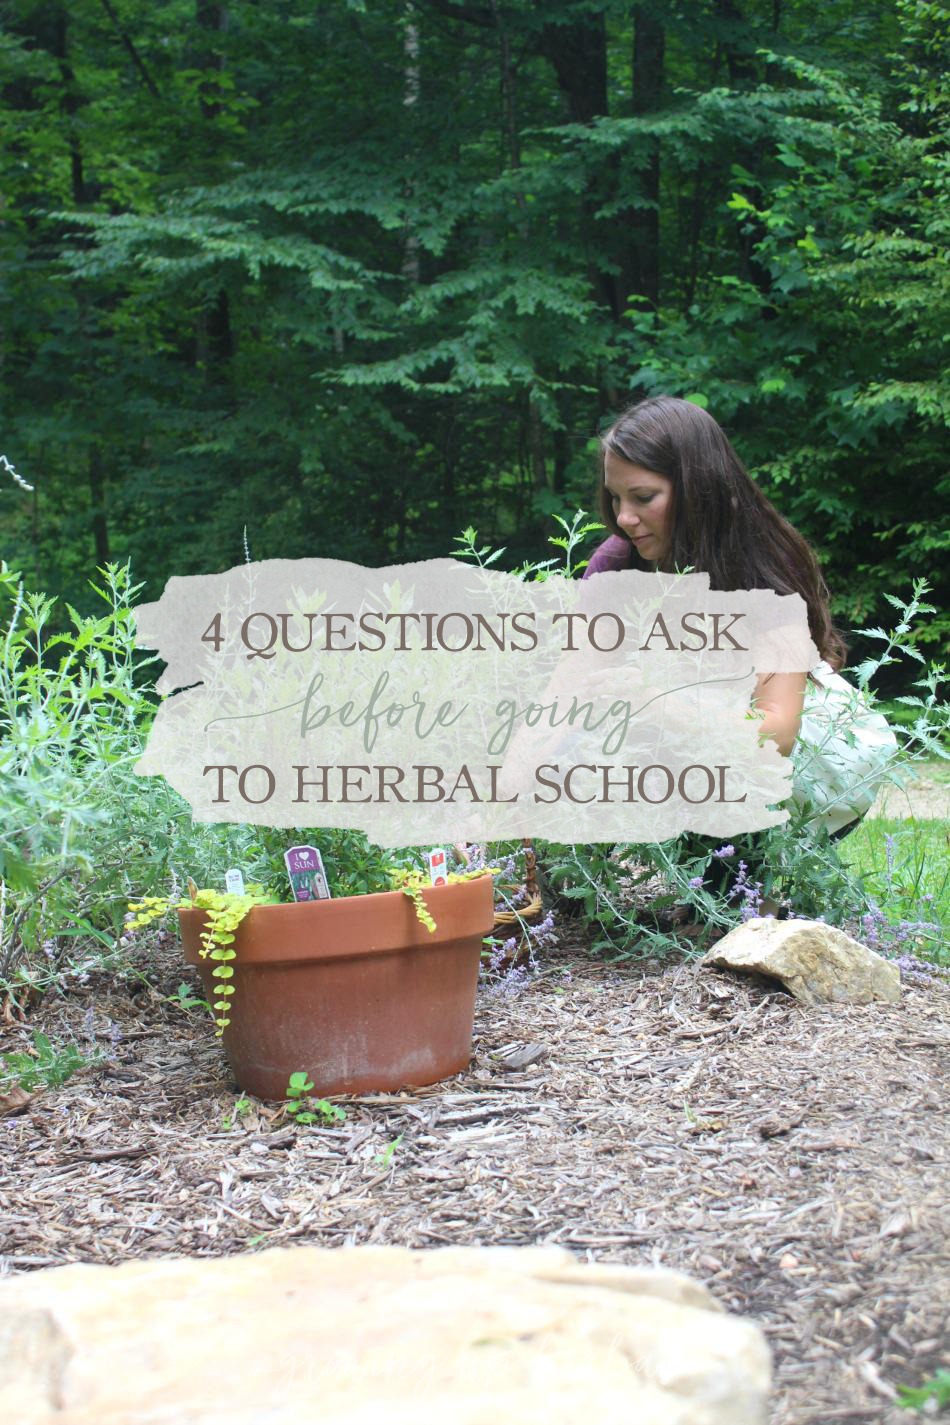 4 Questions To Ask Before Going To Herbal School | Growing Up Herbal | Thinking about going to herbal school, but you're not quite sure if it's for you? Ask yourself these questions first!